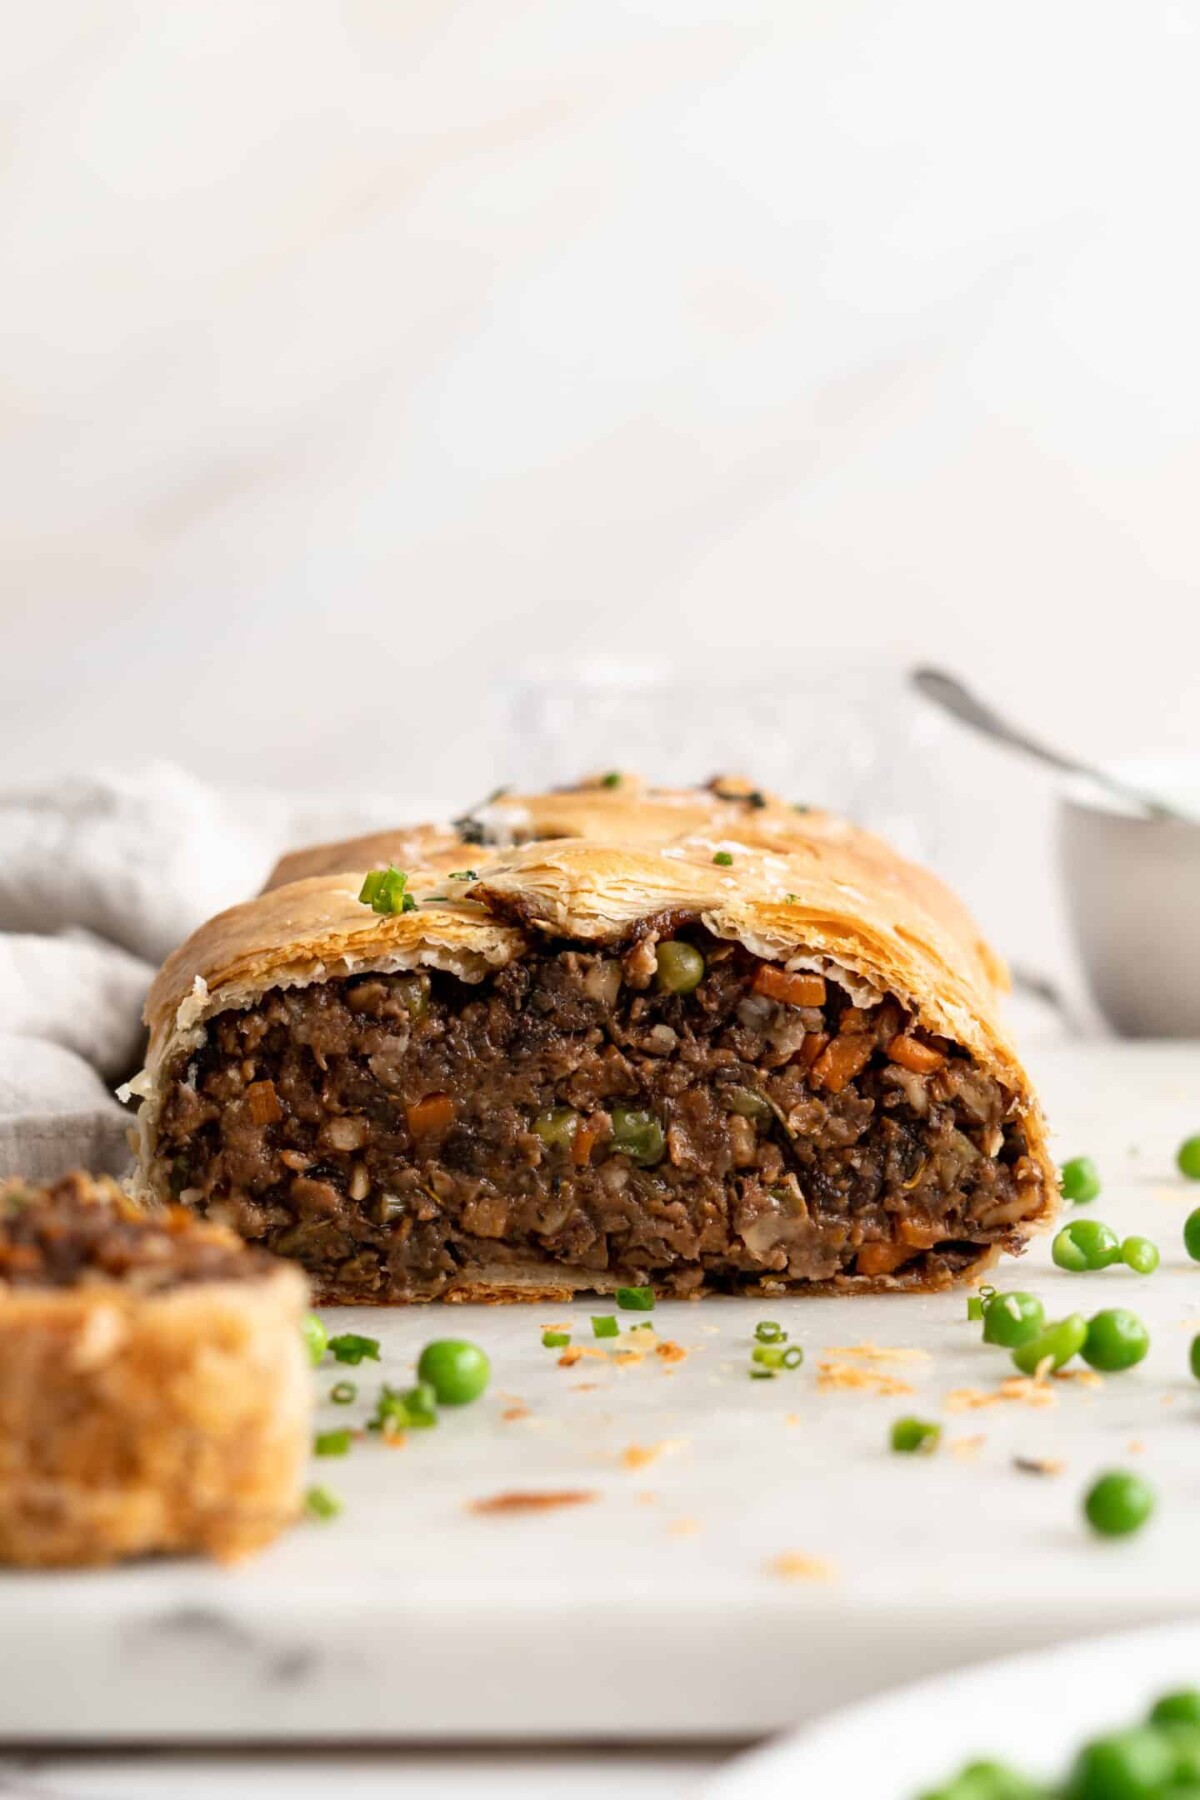 Front on view of a vegan wellington that's been cut in half, surrounded by peas